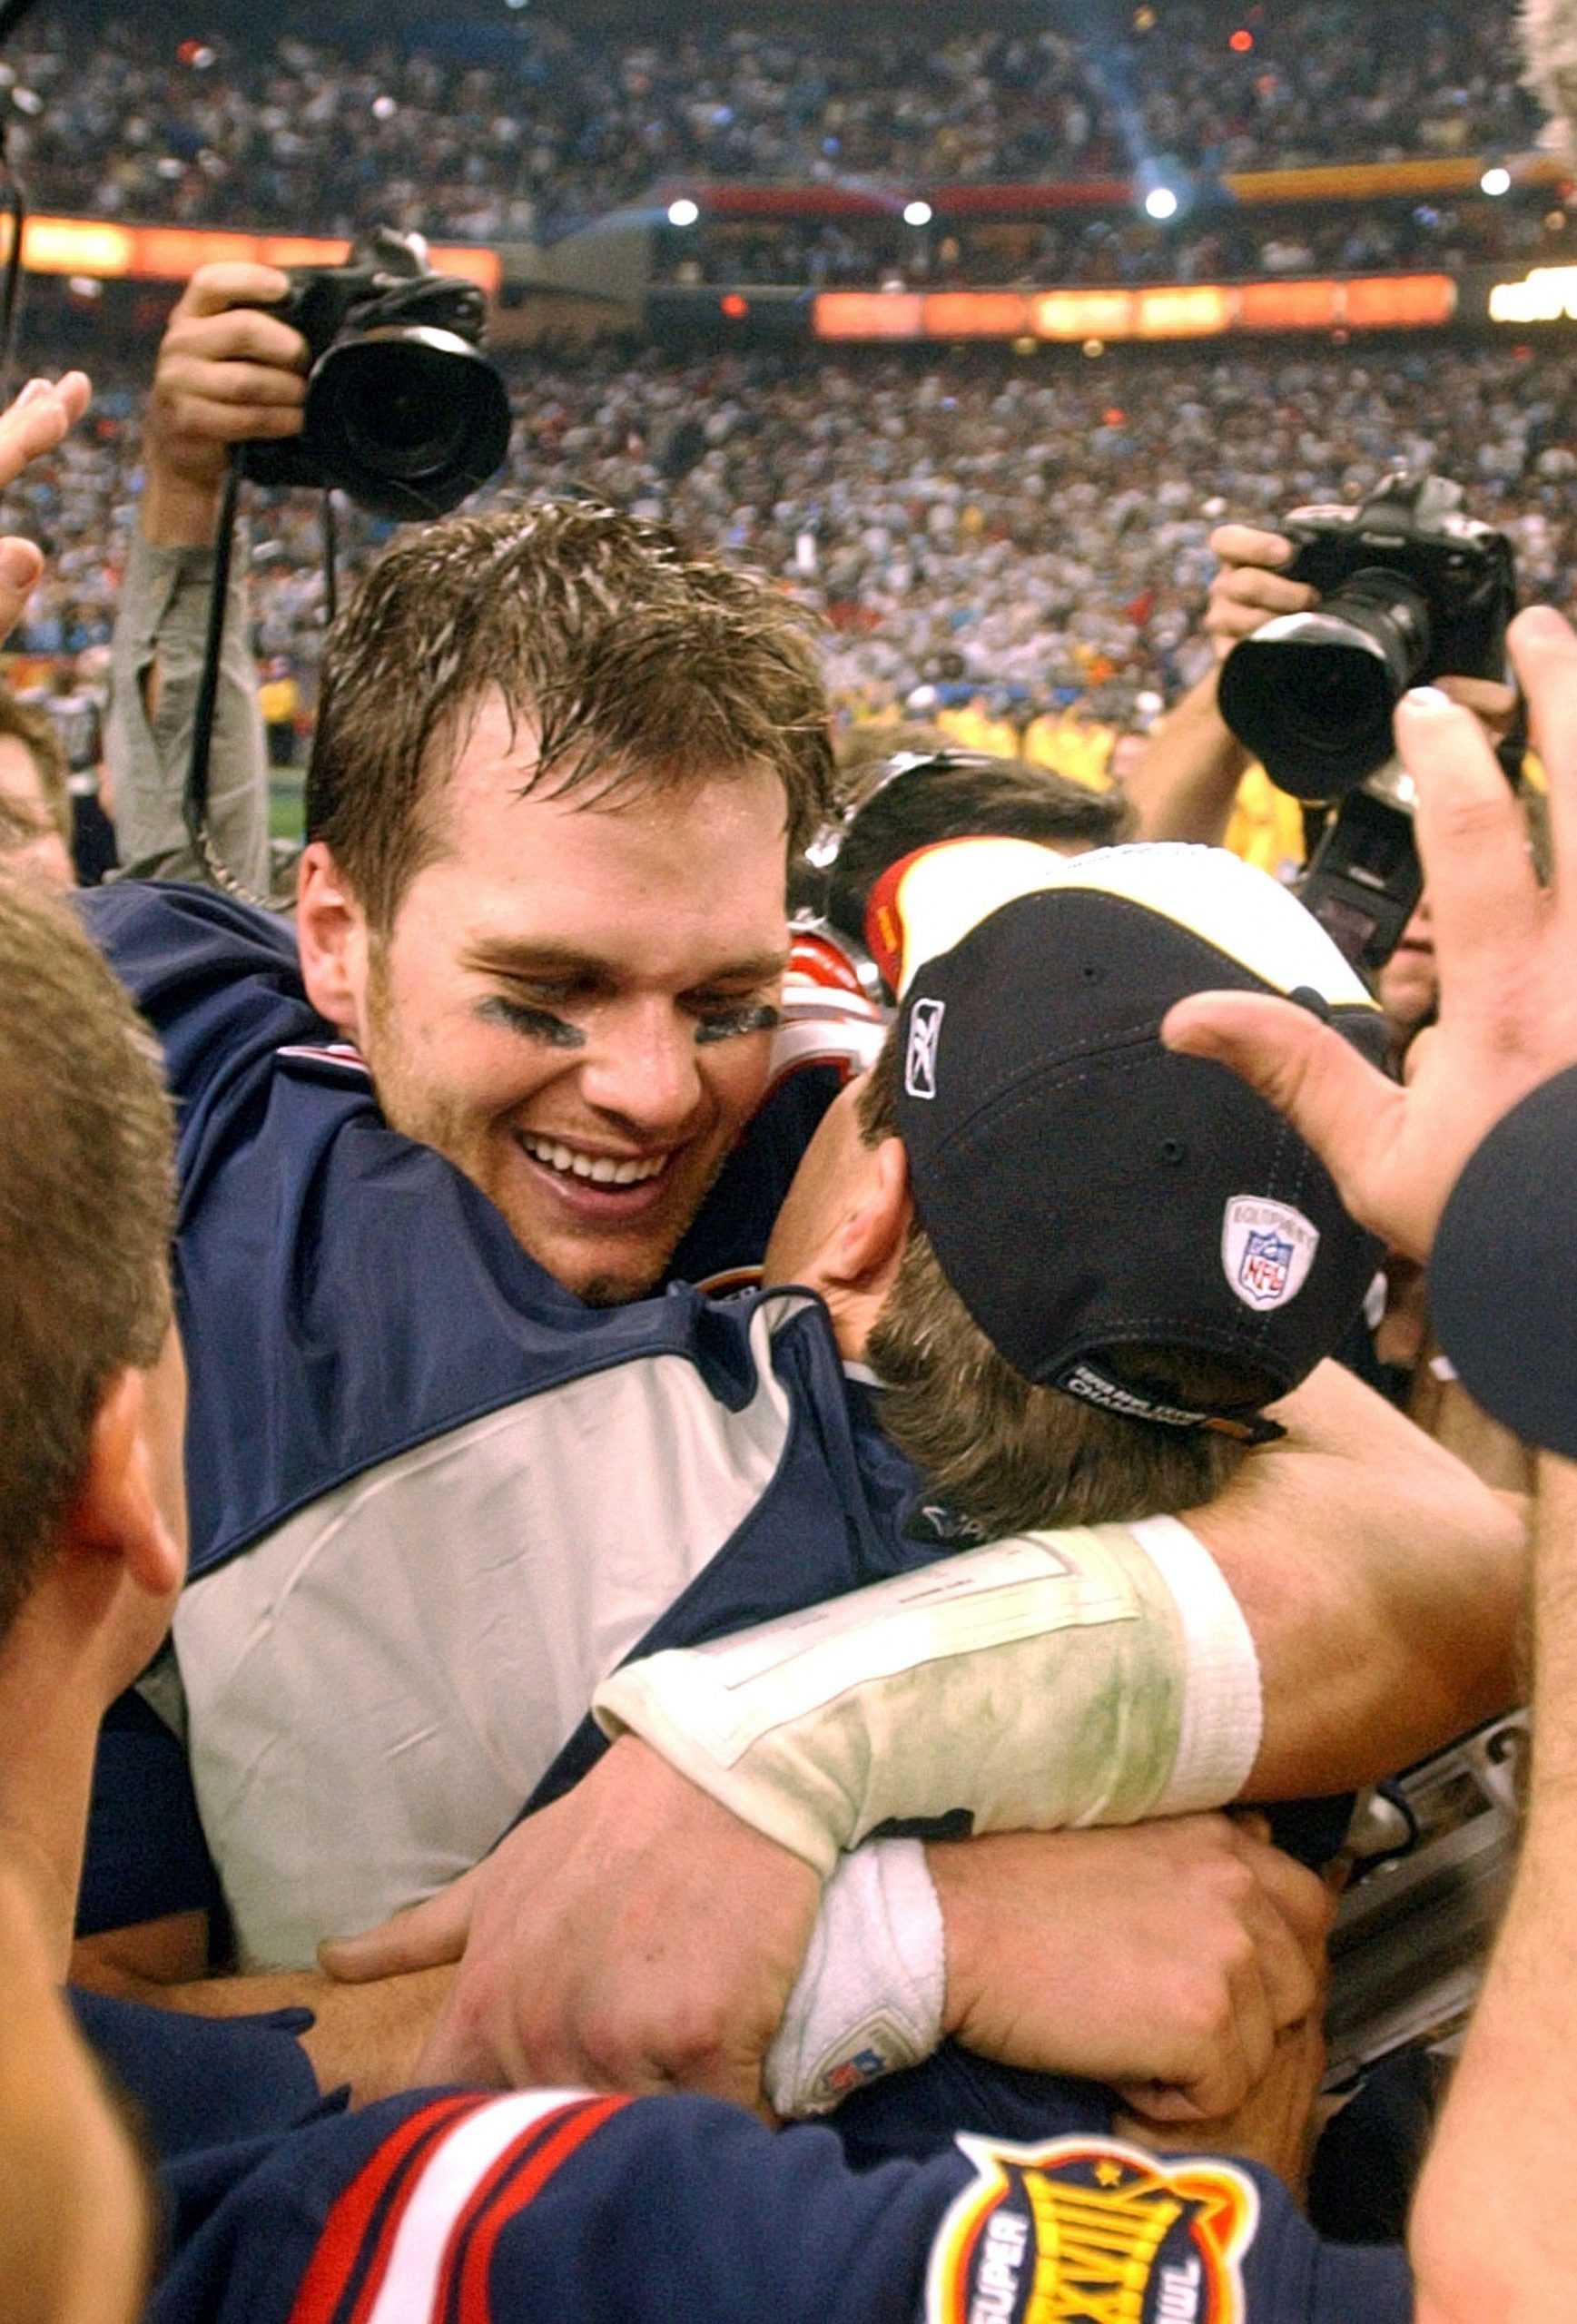 New England quarterbac Tom Brady receives a hug from head coach Bill Belichick following the New England Patriots 32-29 victory over the Carolina Panthers in Super Bowl XXXVIII at Reliant Stadium, Sunday, February 1, 2004 in Houston, Texas. (George Bridges/MCT)